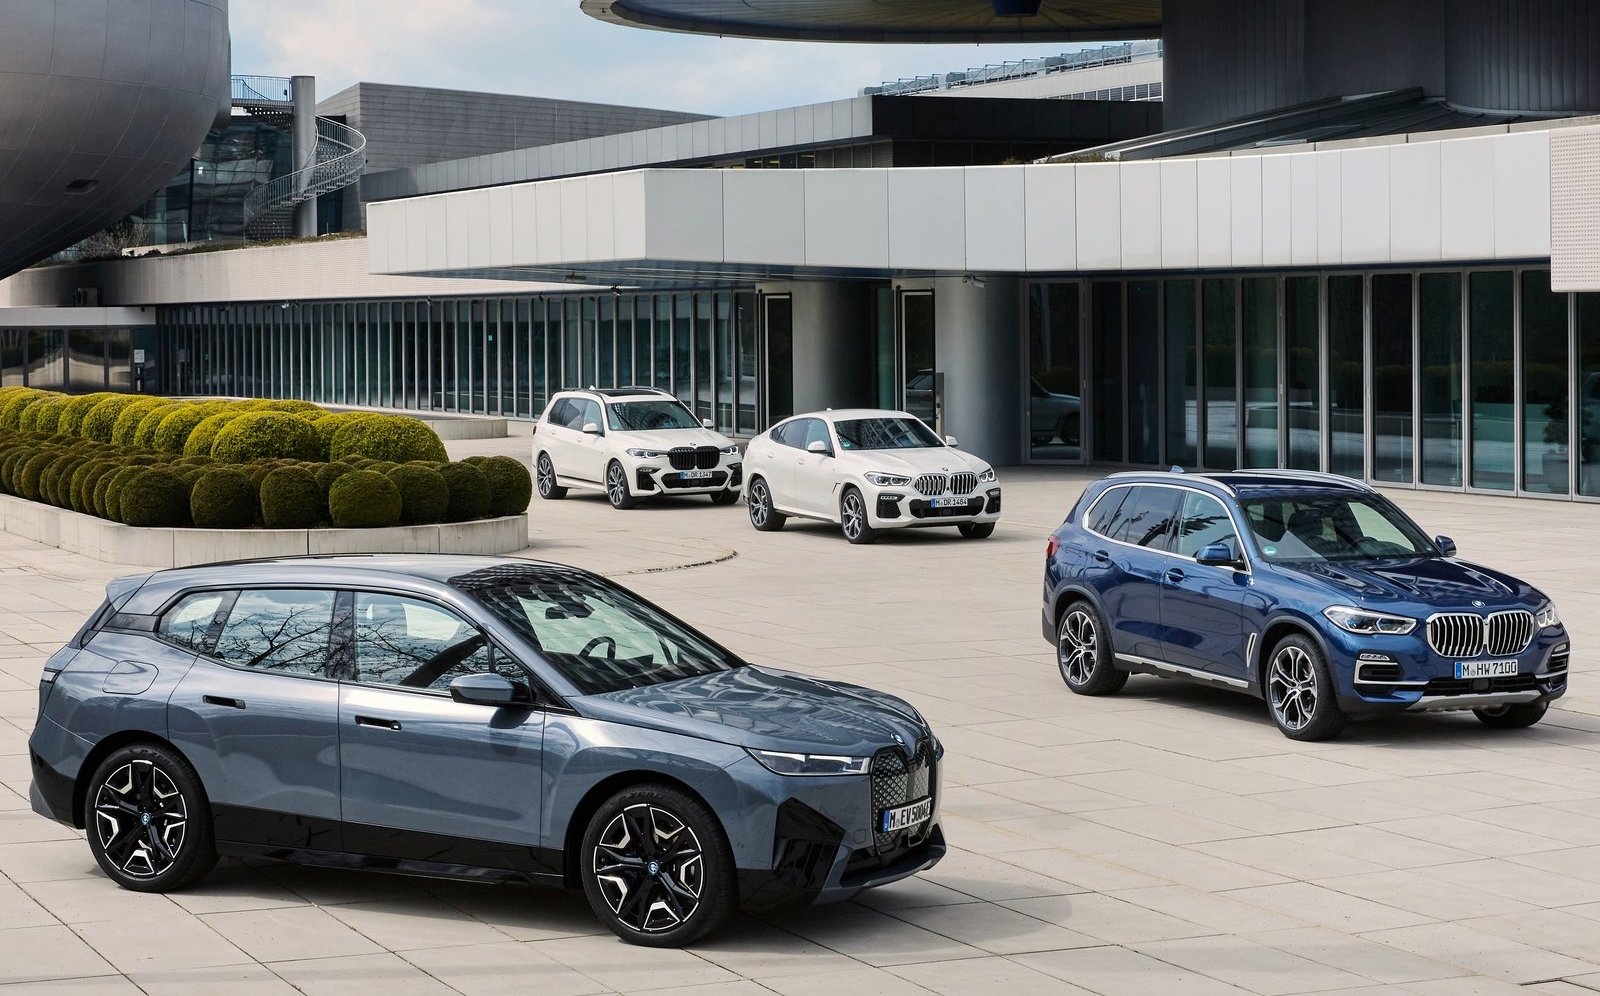 BMW Group global sales up 17.9% year-to-date through September